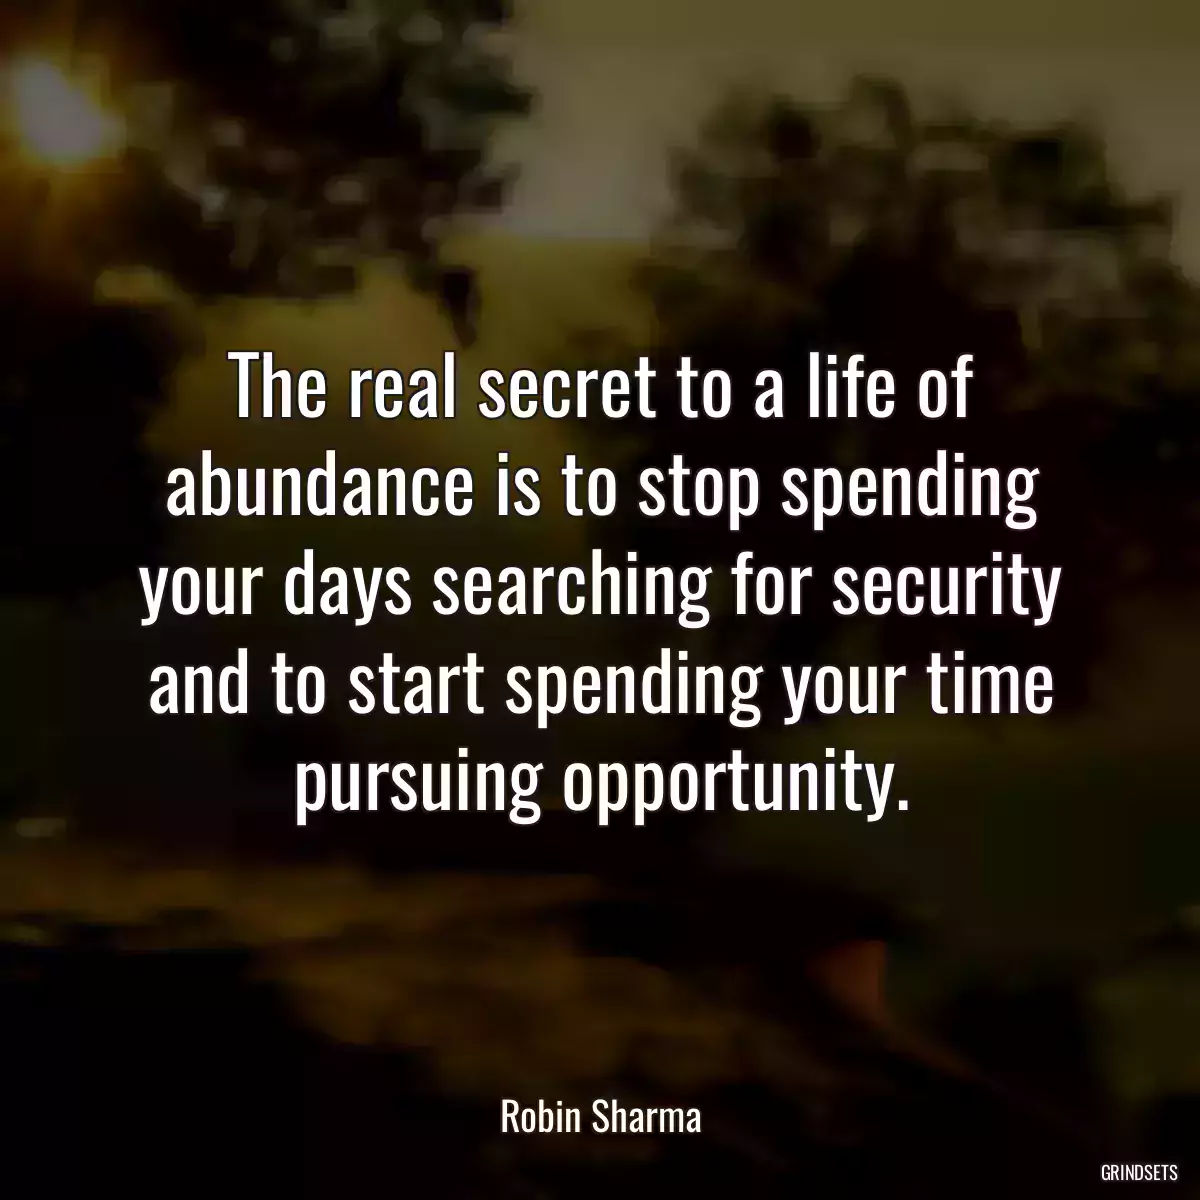 The real secret to a life of abundance is to stop spending your days searching for security and to start spending your time pursuing opportunity.